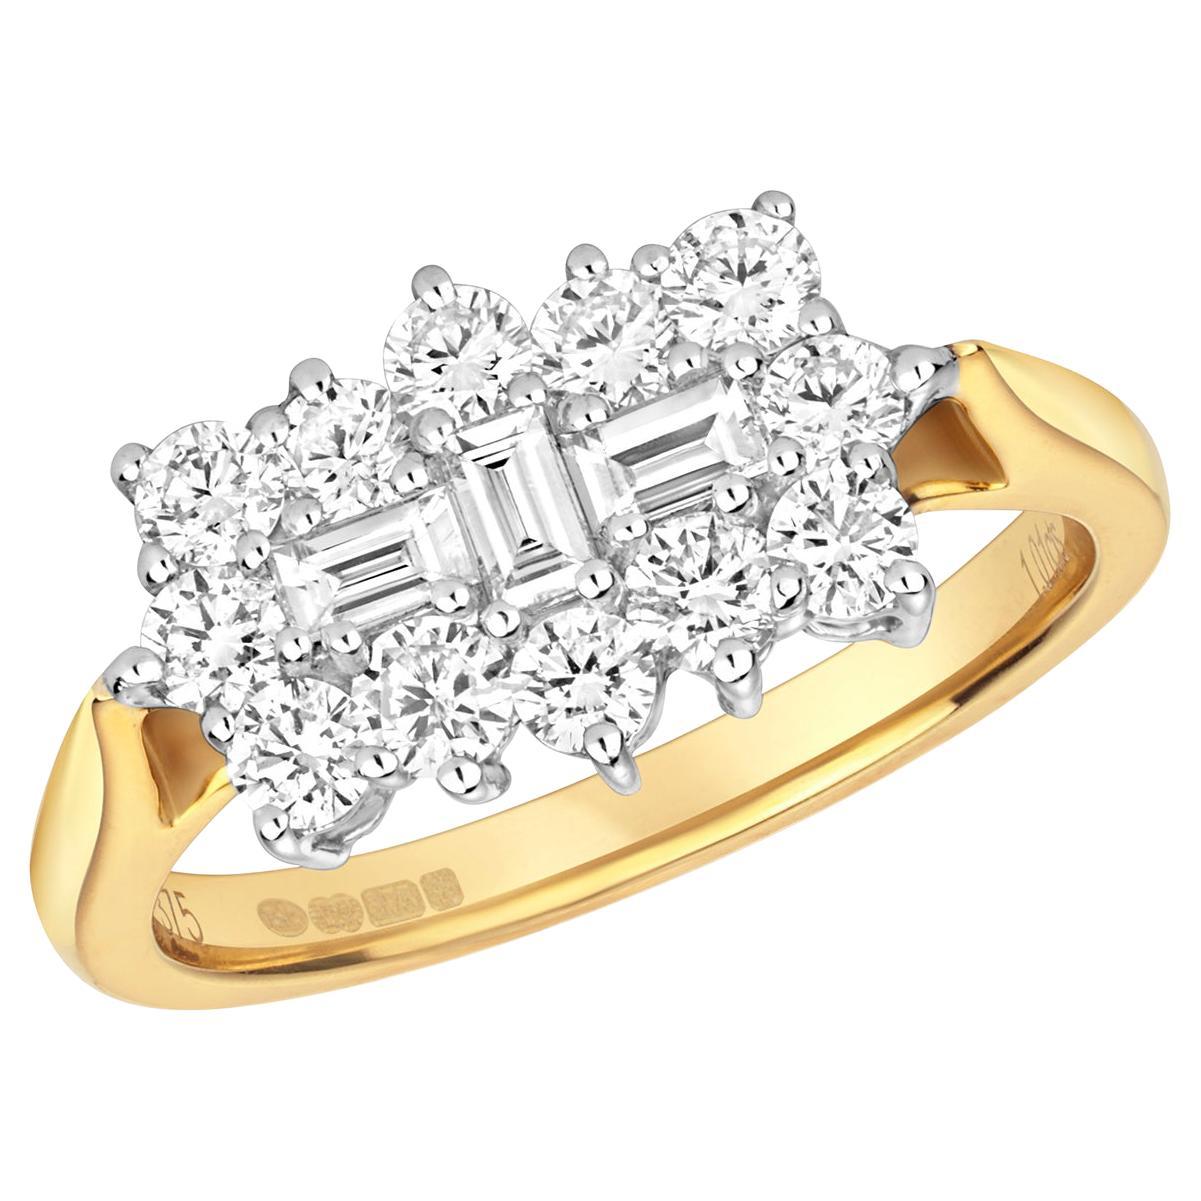 1ct DIAMOND ROUND AND BAGUETTE CLUSTER BOAT RING IN 9CT GOLD